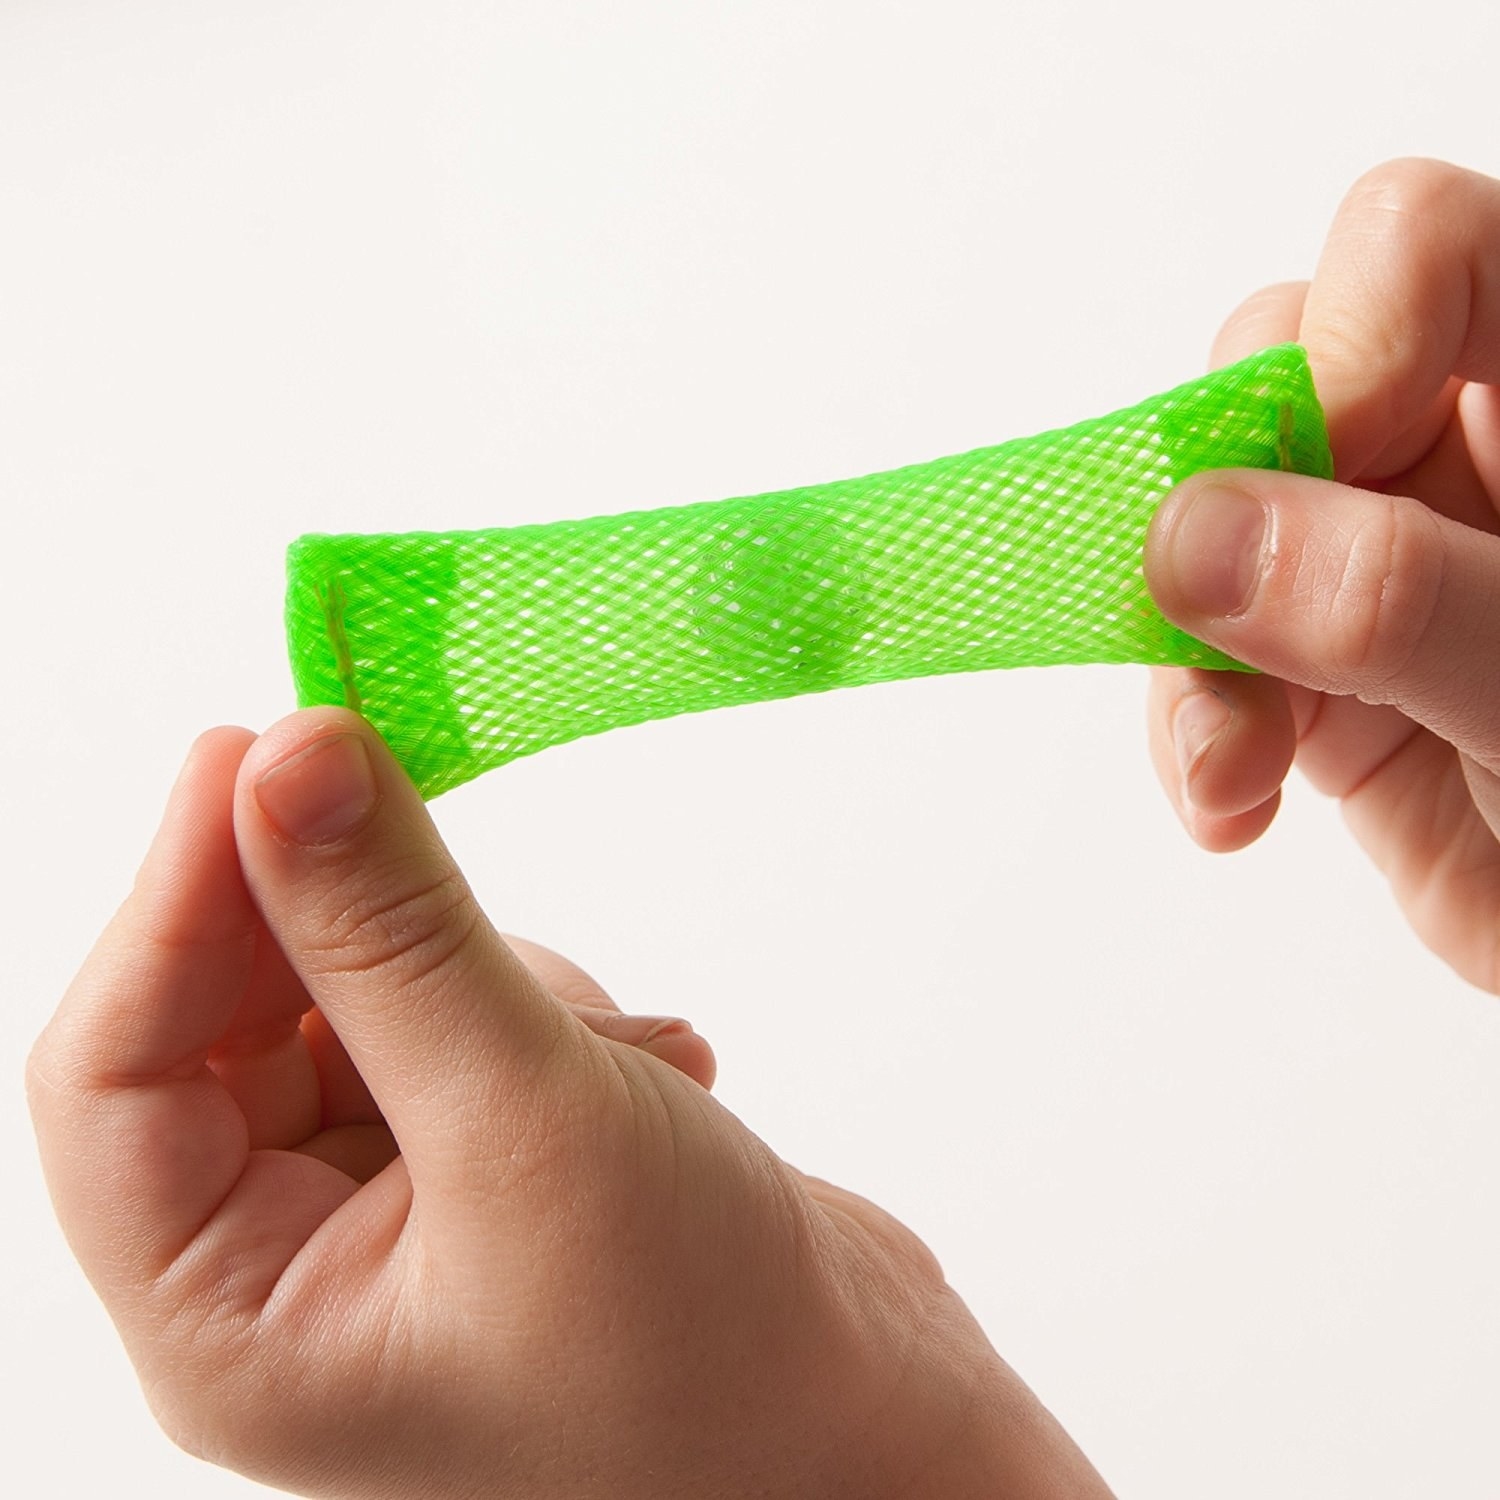 29 Perfect Toys For Keeping Your Fidgety Hands Distracted